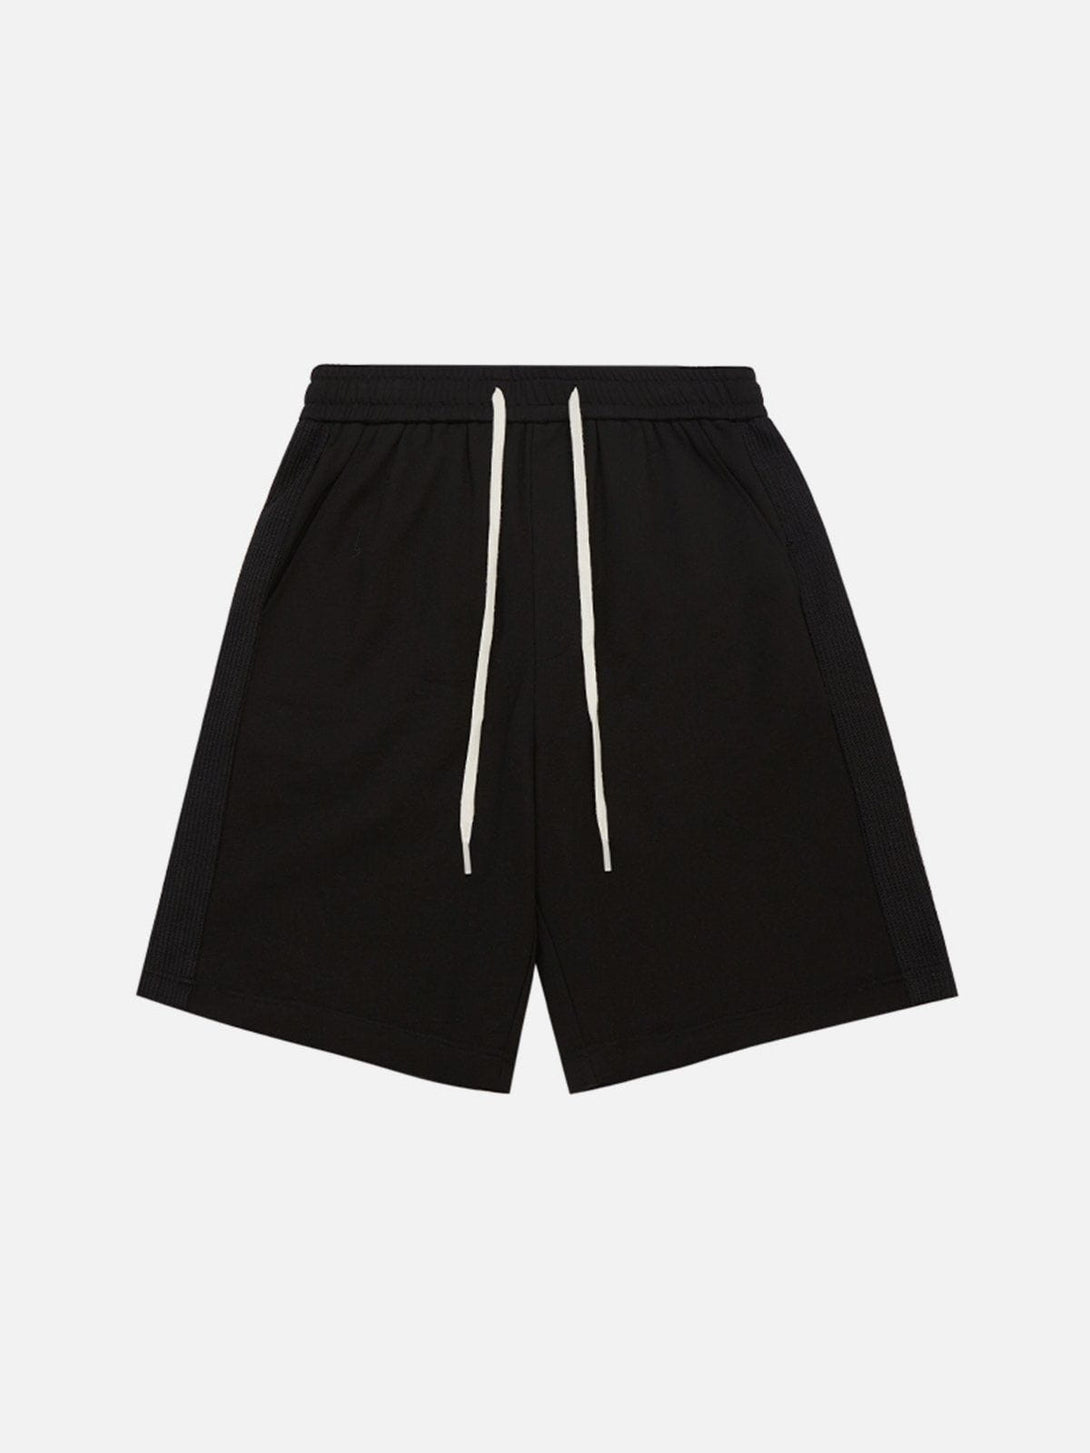 Ellesey - Solid Color Shorts- Streetwear Fashion - ellesey.com